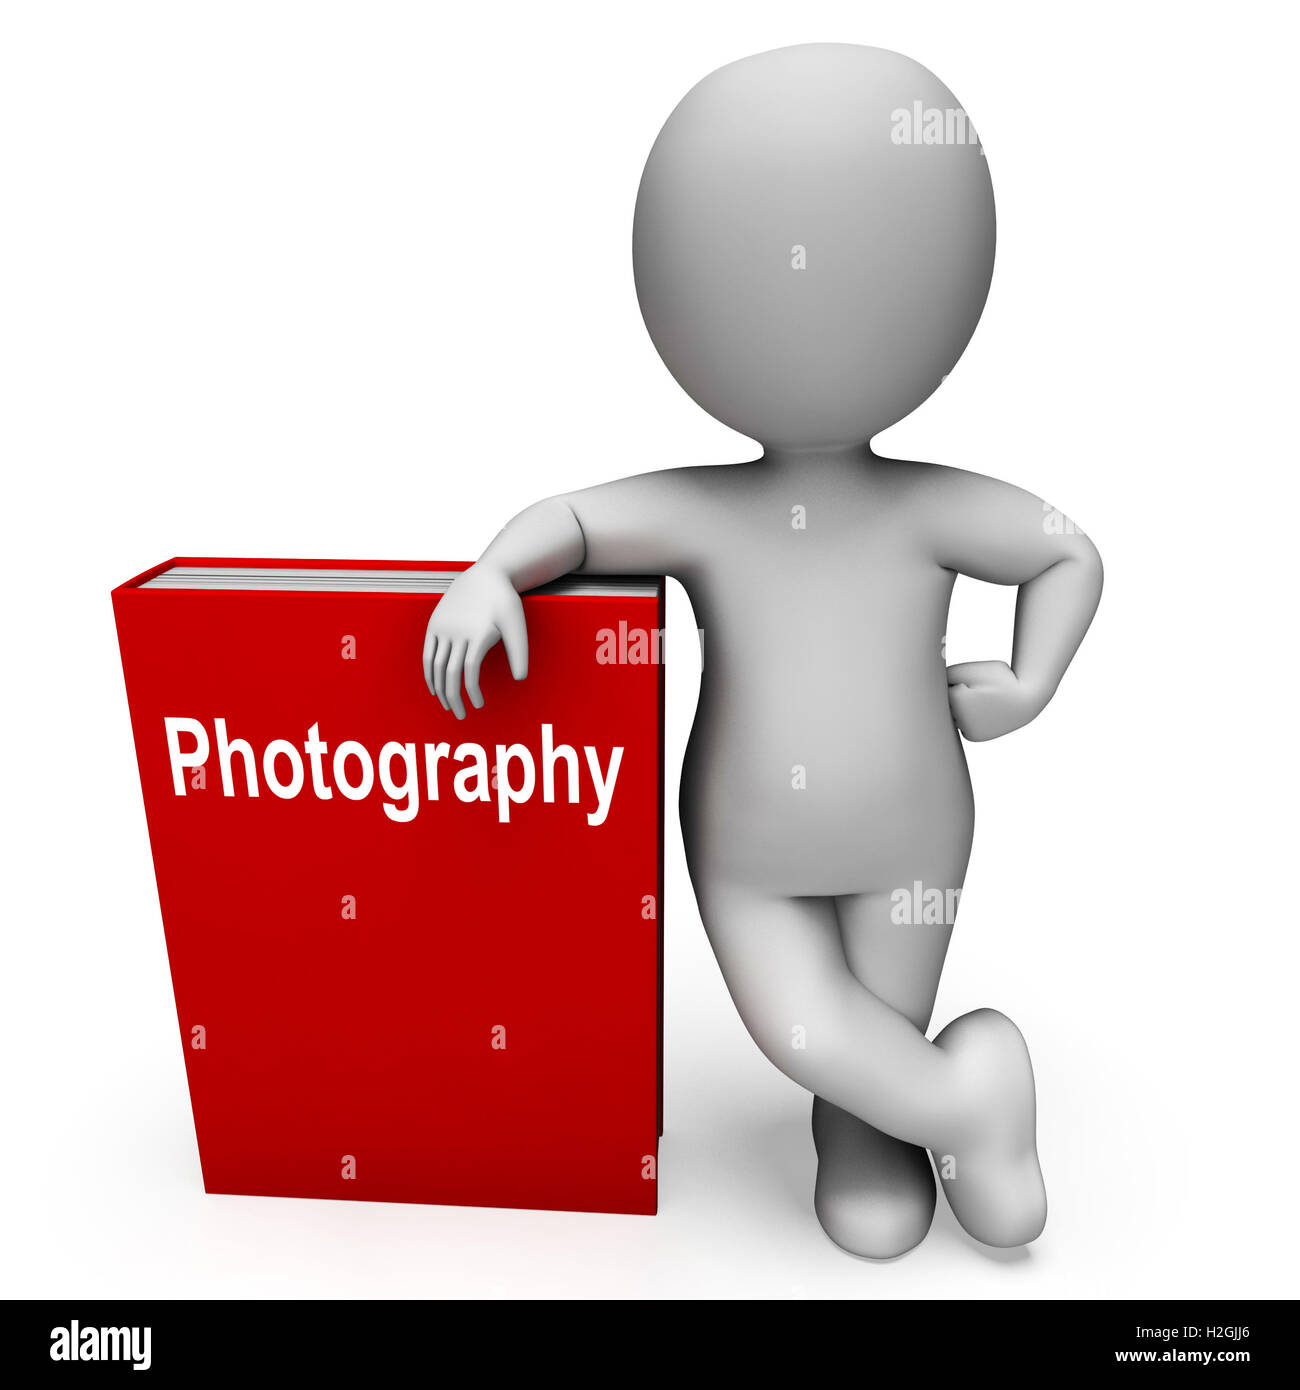 Photography Book And Character Shows Take Pictures Or Photograph Stock Photo